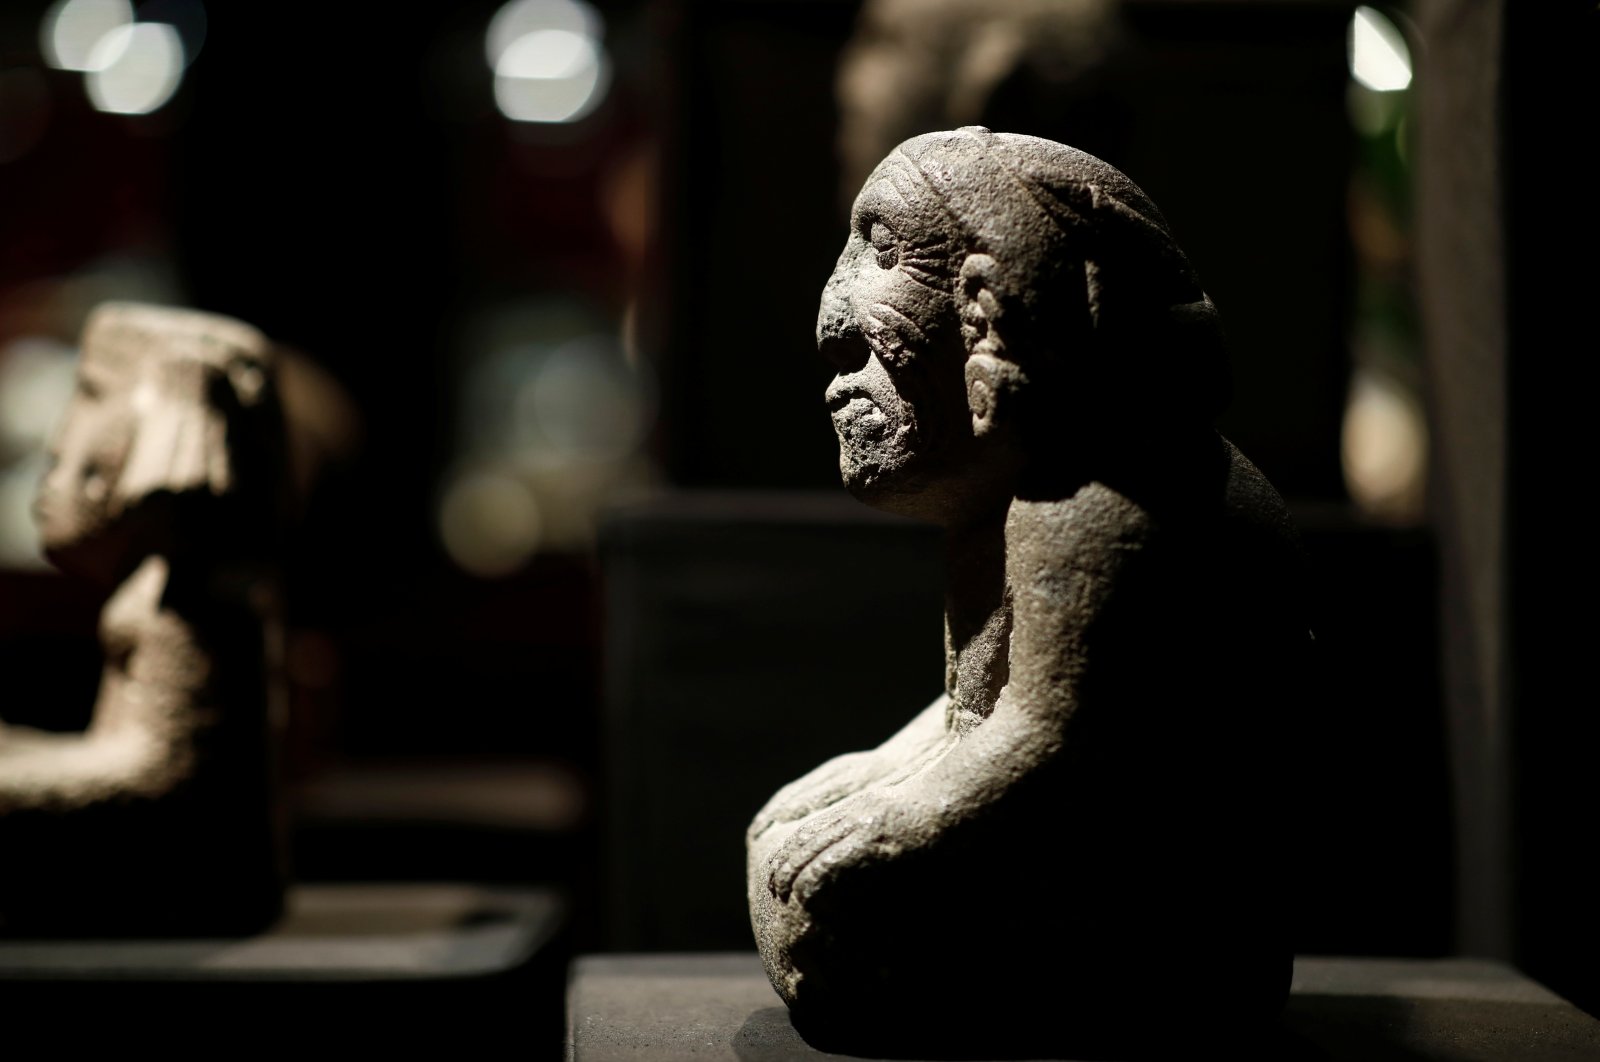 A pre-Columbian stone figure of the kneeling goddess of fertility and earth, Coatlicue, is presented to the press at the Drouot auction house in Paris, France, Sept. 18, 2019. (Reuters Photo)